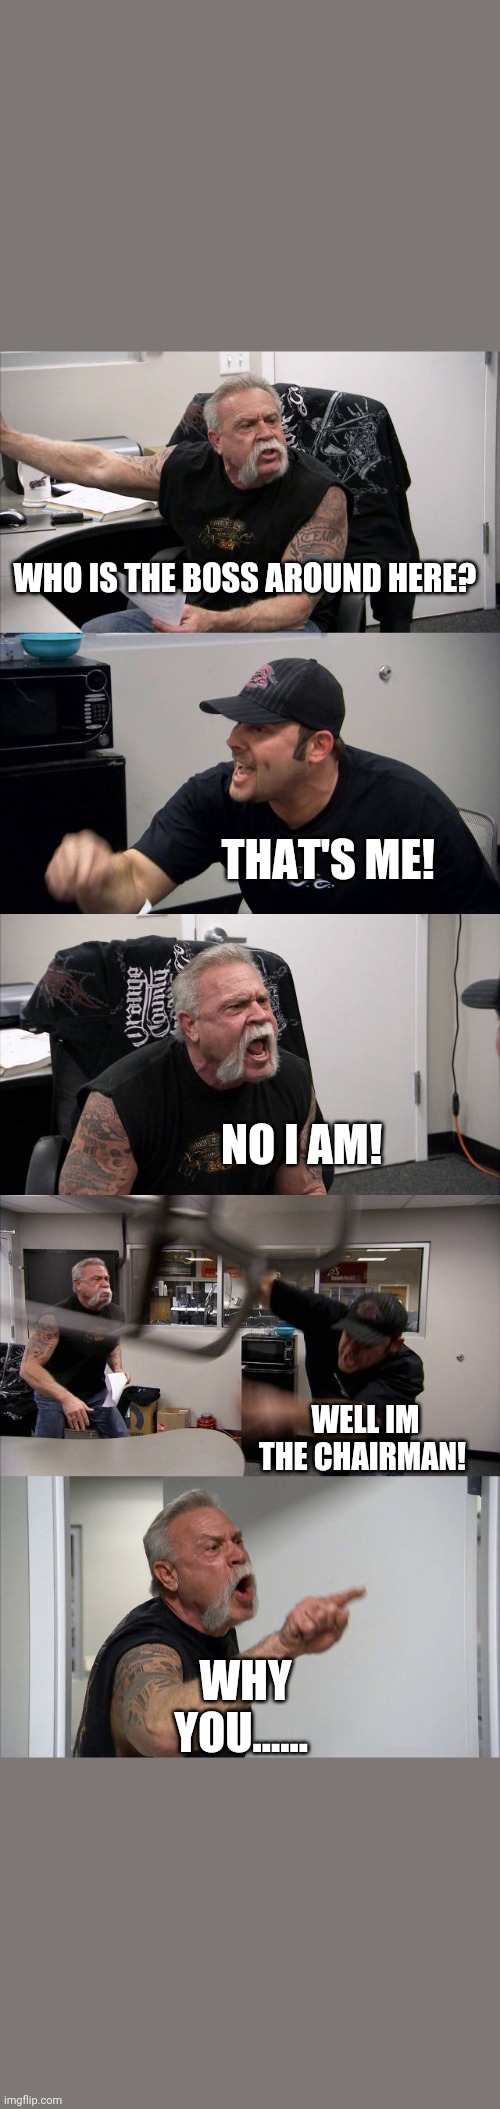 American Chopper Argument Meme | WHO IS THE BOSS AROUND HERE? THAT'S ME! NO I AM! WELL IM THE CHAIRMAN! WHY YOU...... | image tagged in memes,american chopper argument | made w/ Imgflip meme maker